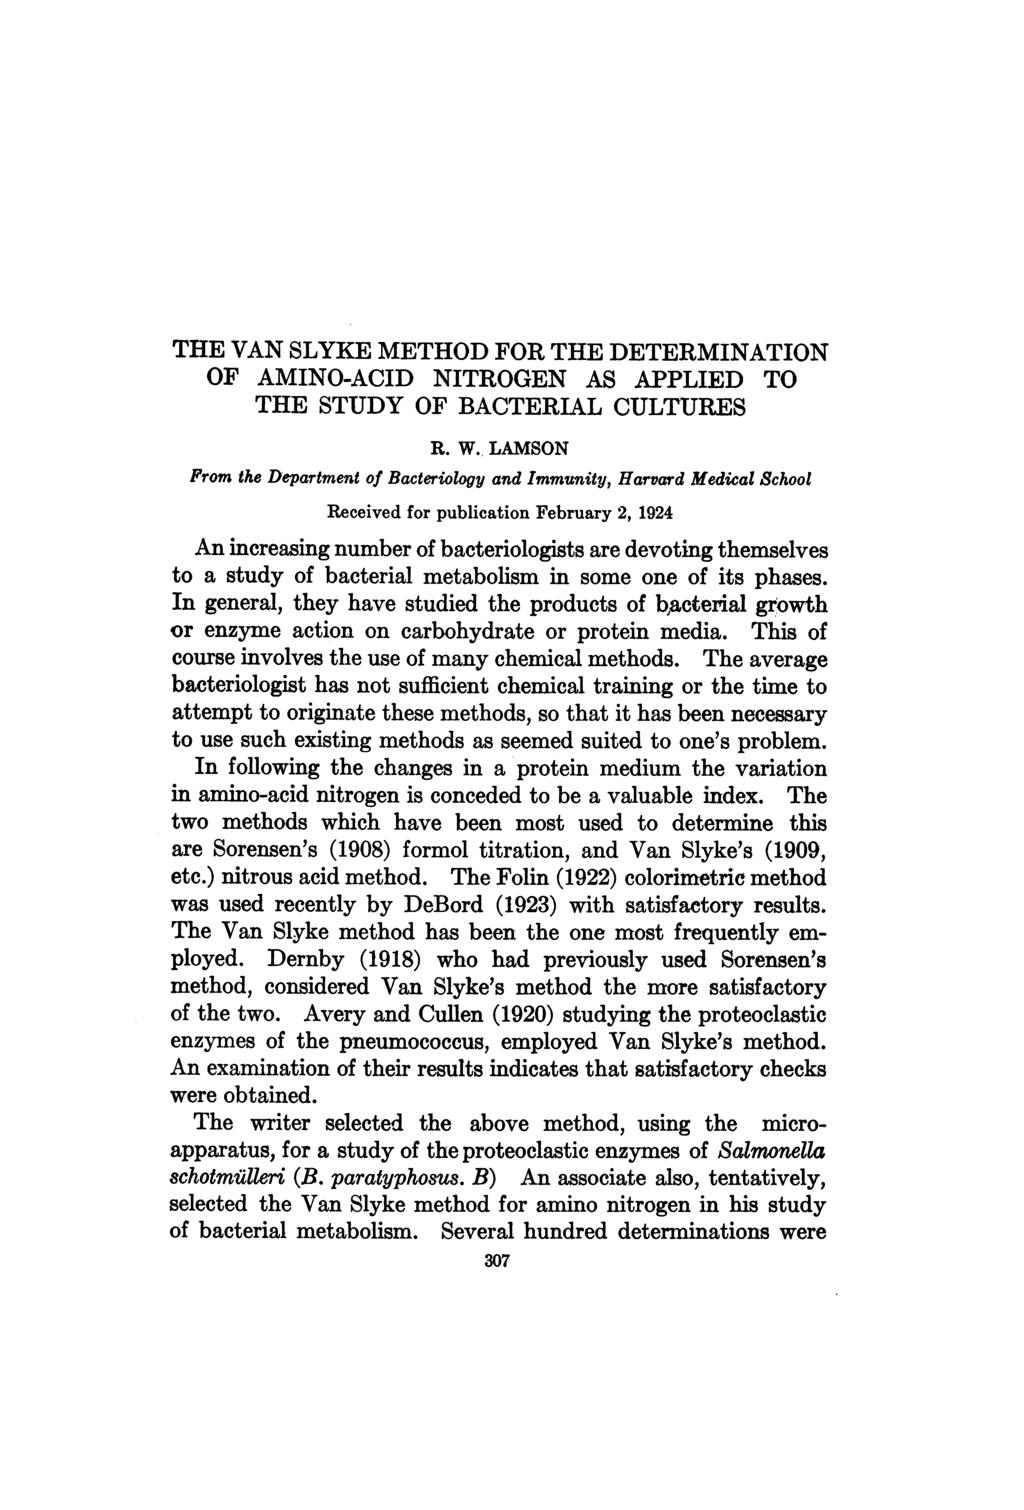 THE VAN SLYKE METHOD FOR THE DETERMINATION OF AMINO-ACID NITROGEN AS APPLIED TO THE STUDY OF BACTERIAL CULTURES R. W.